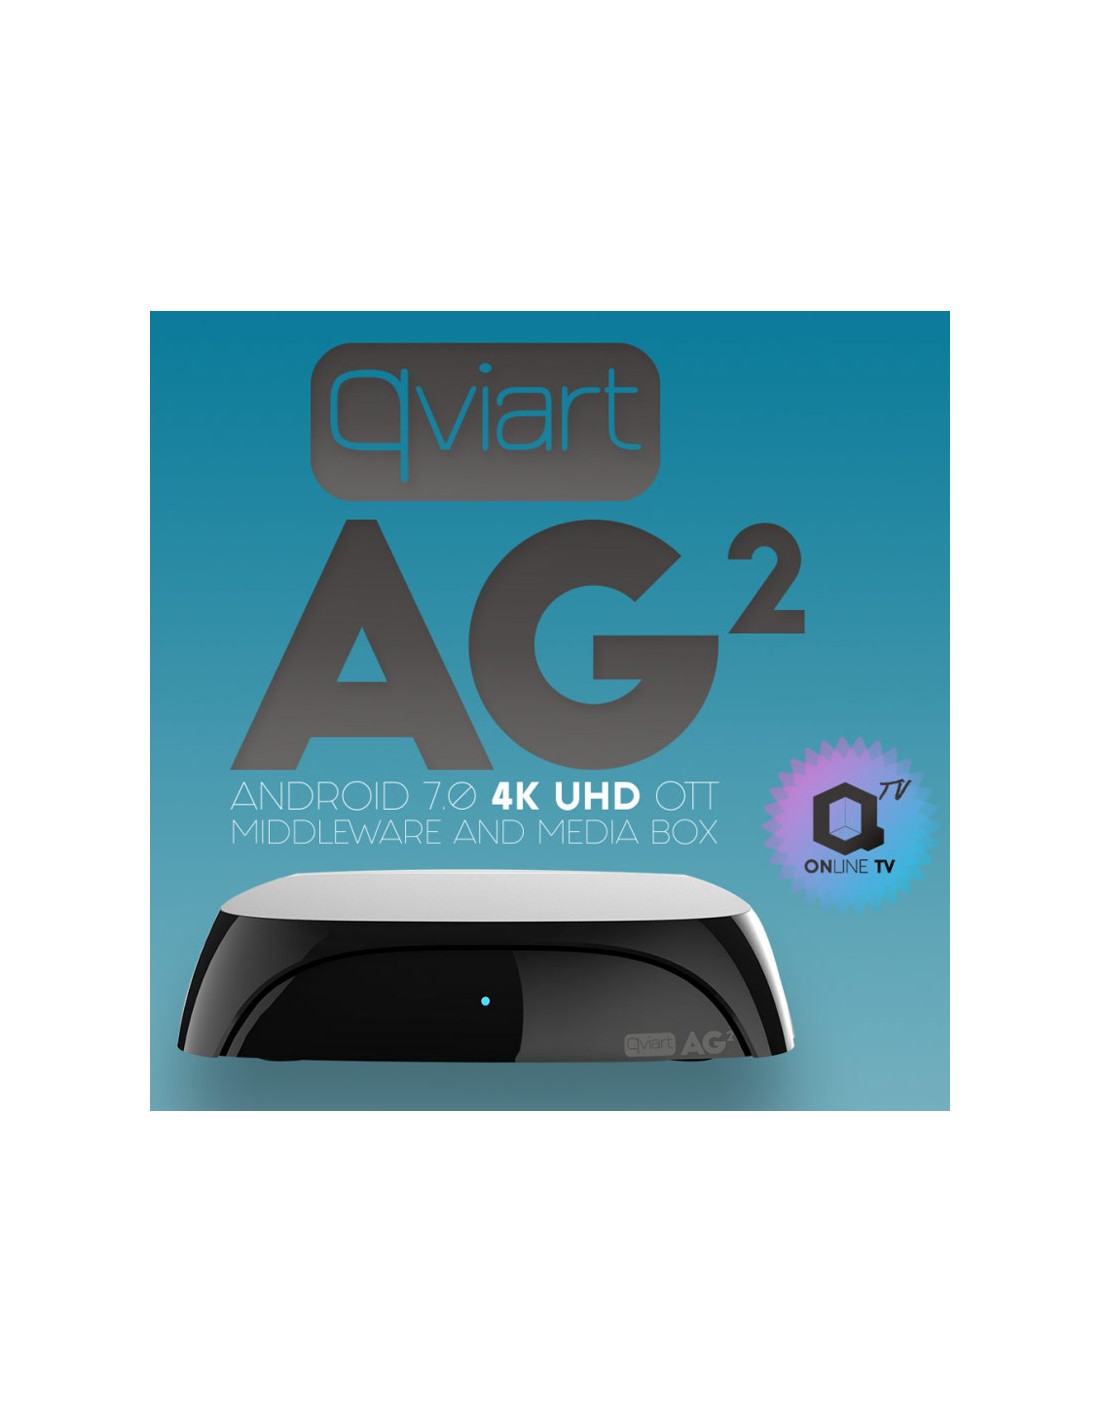 Receptor IPTV QVIART AG2, 4K, Android 7, Wi-Fi, Bluetooth, color Negro